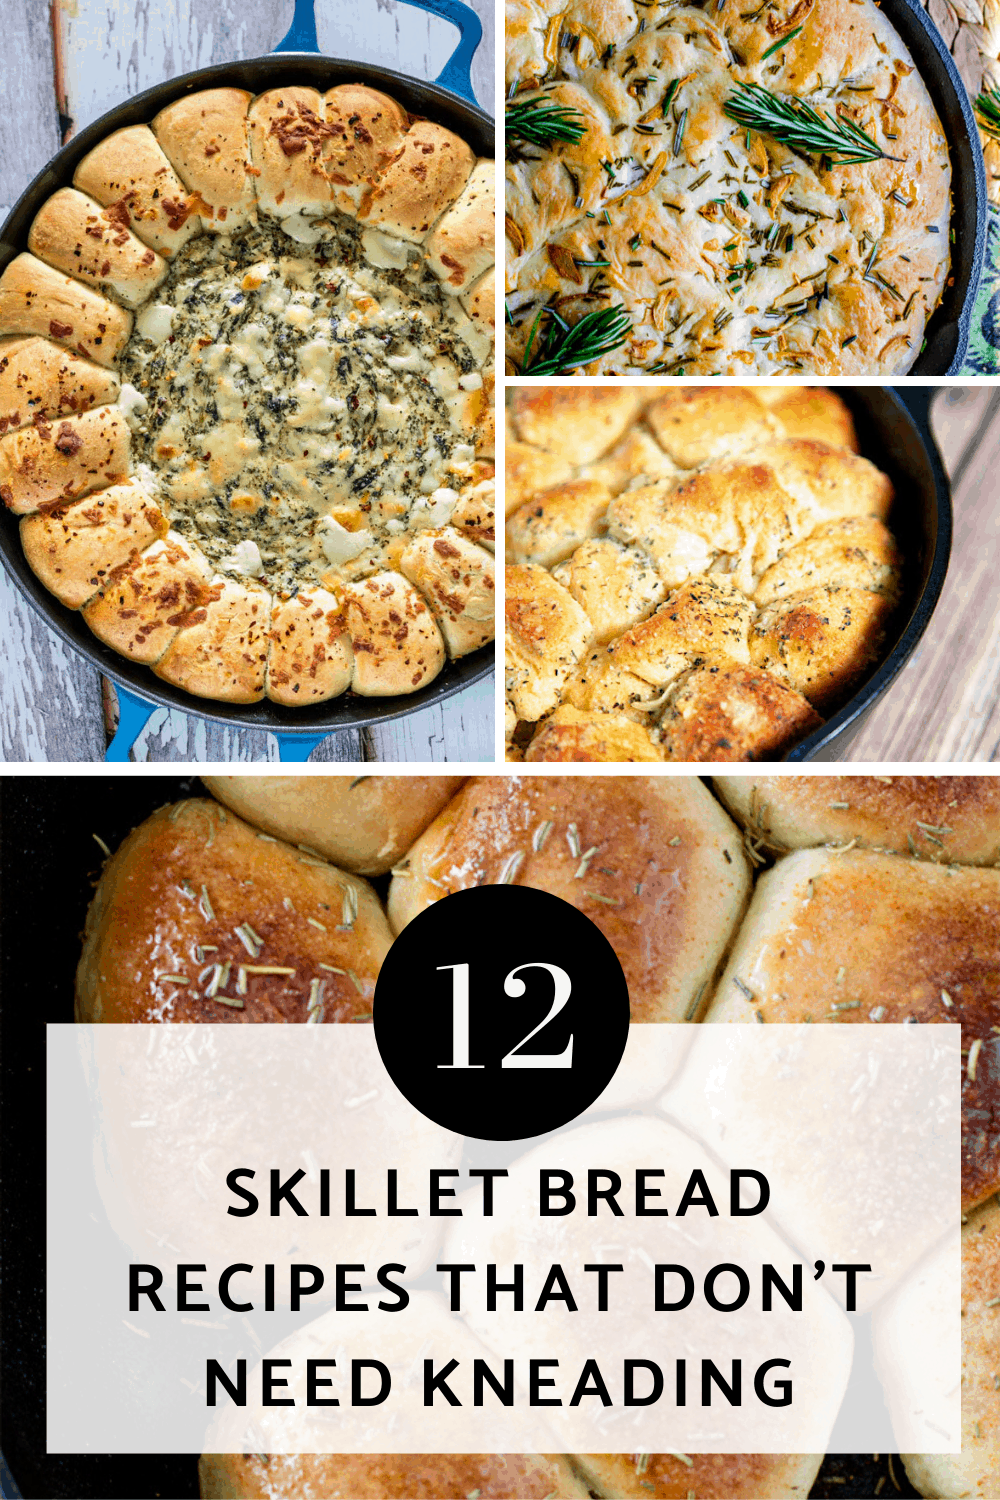 These no knead skillet breads taste delicious - just what your cast iron pan was made for!